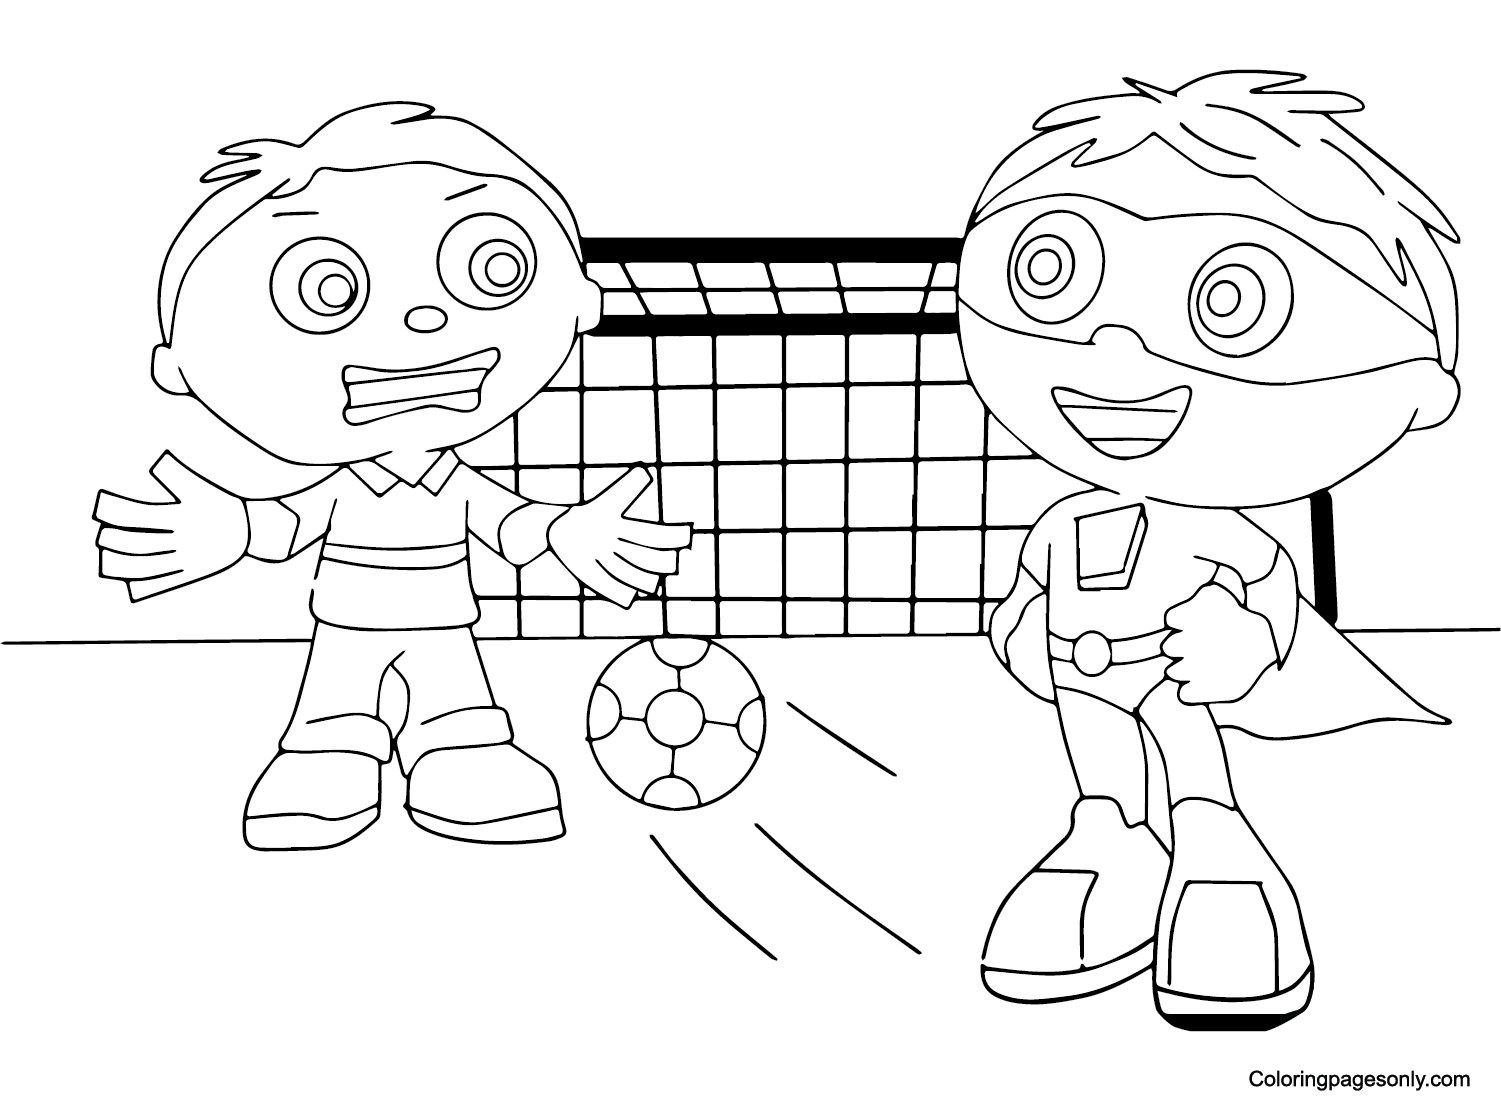 Super Why with Whyatt Beanstalk Coloring Page